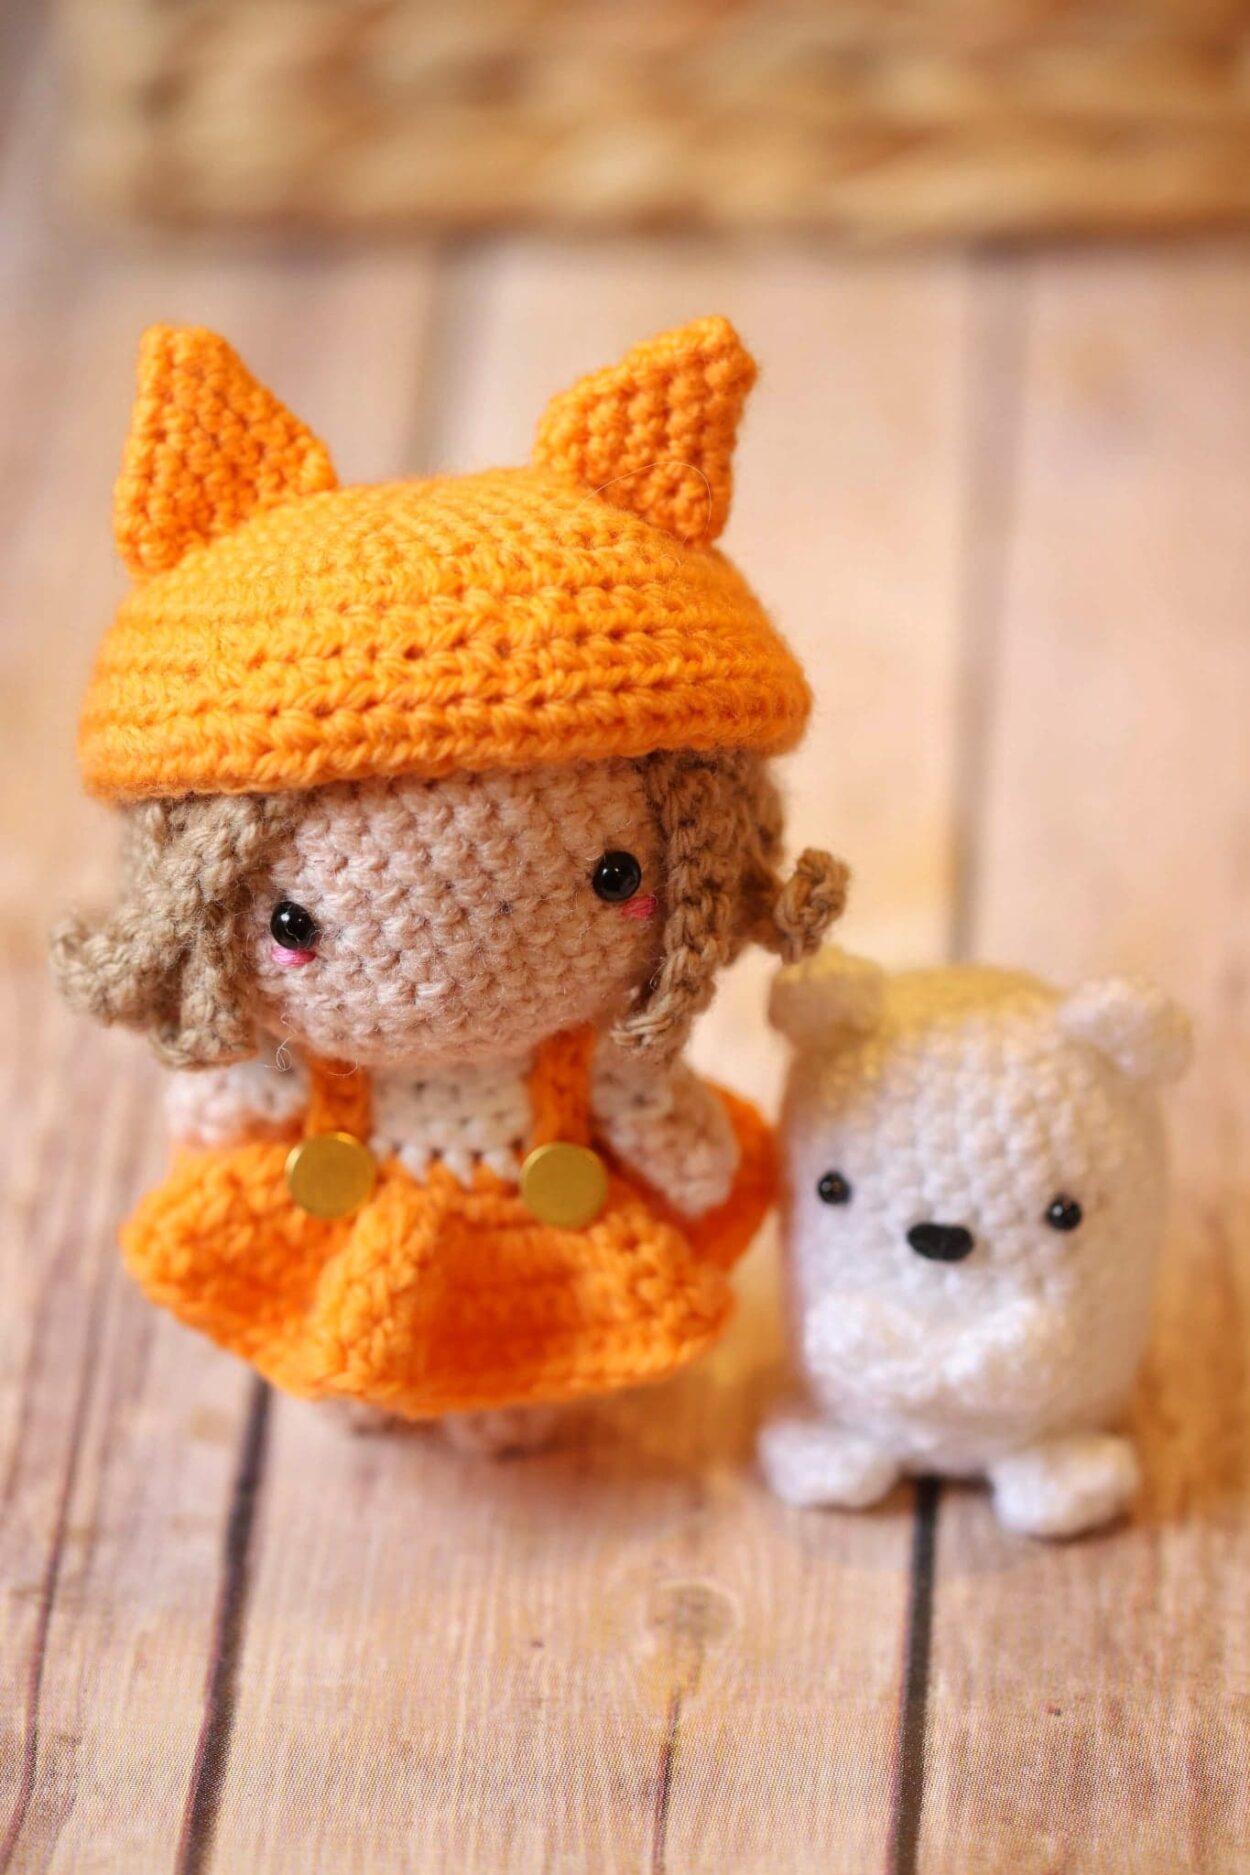 How Long Does It Take To Learn To Crochet Amigurumi - CraftingsofJoules